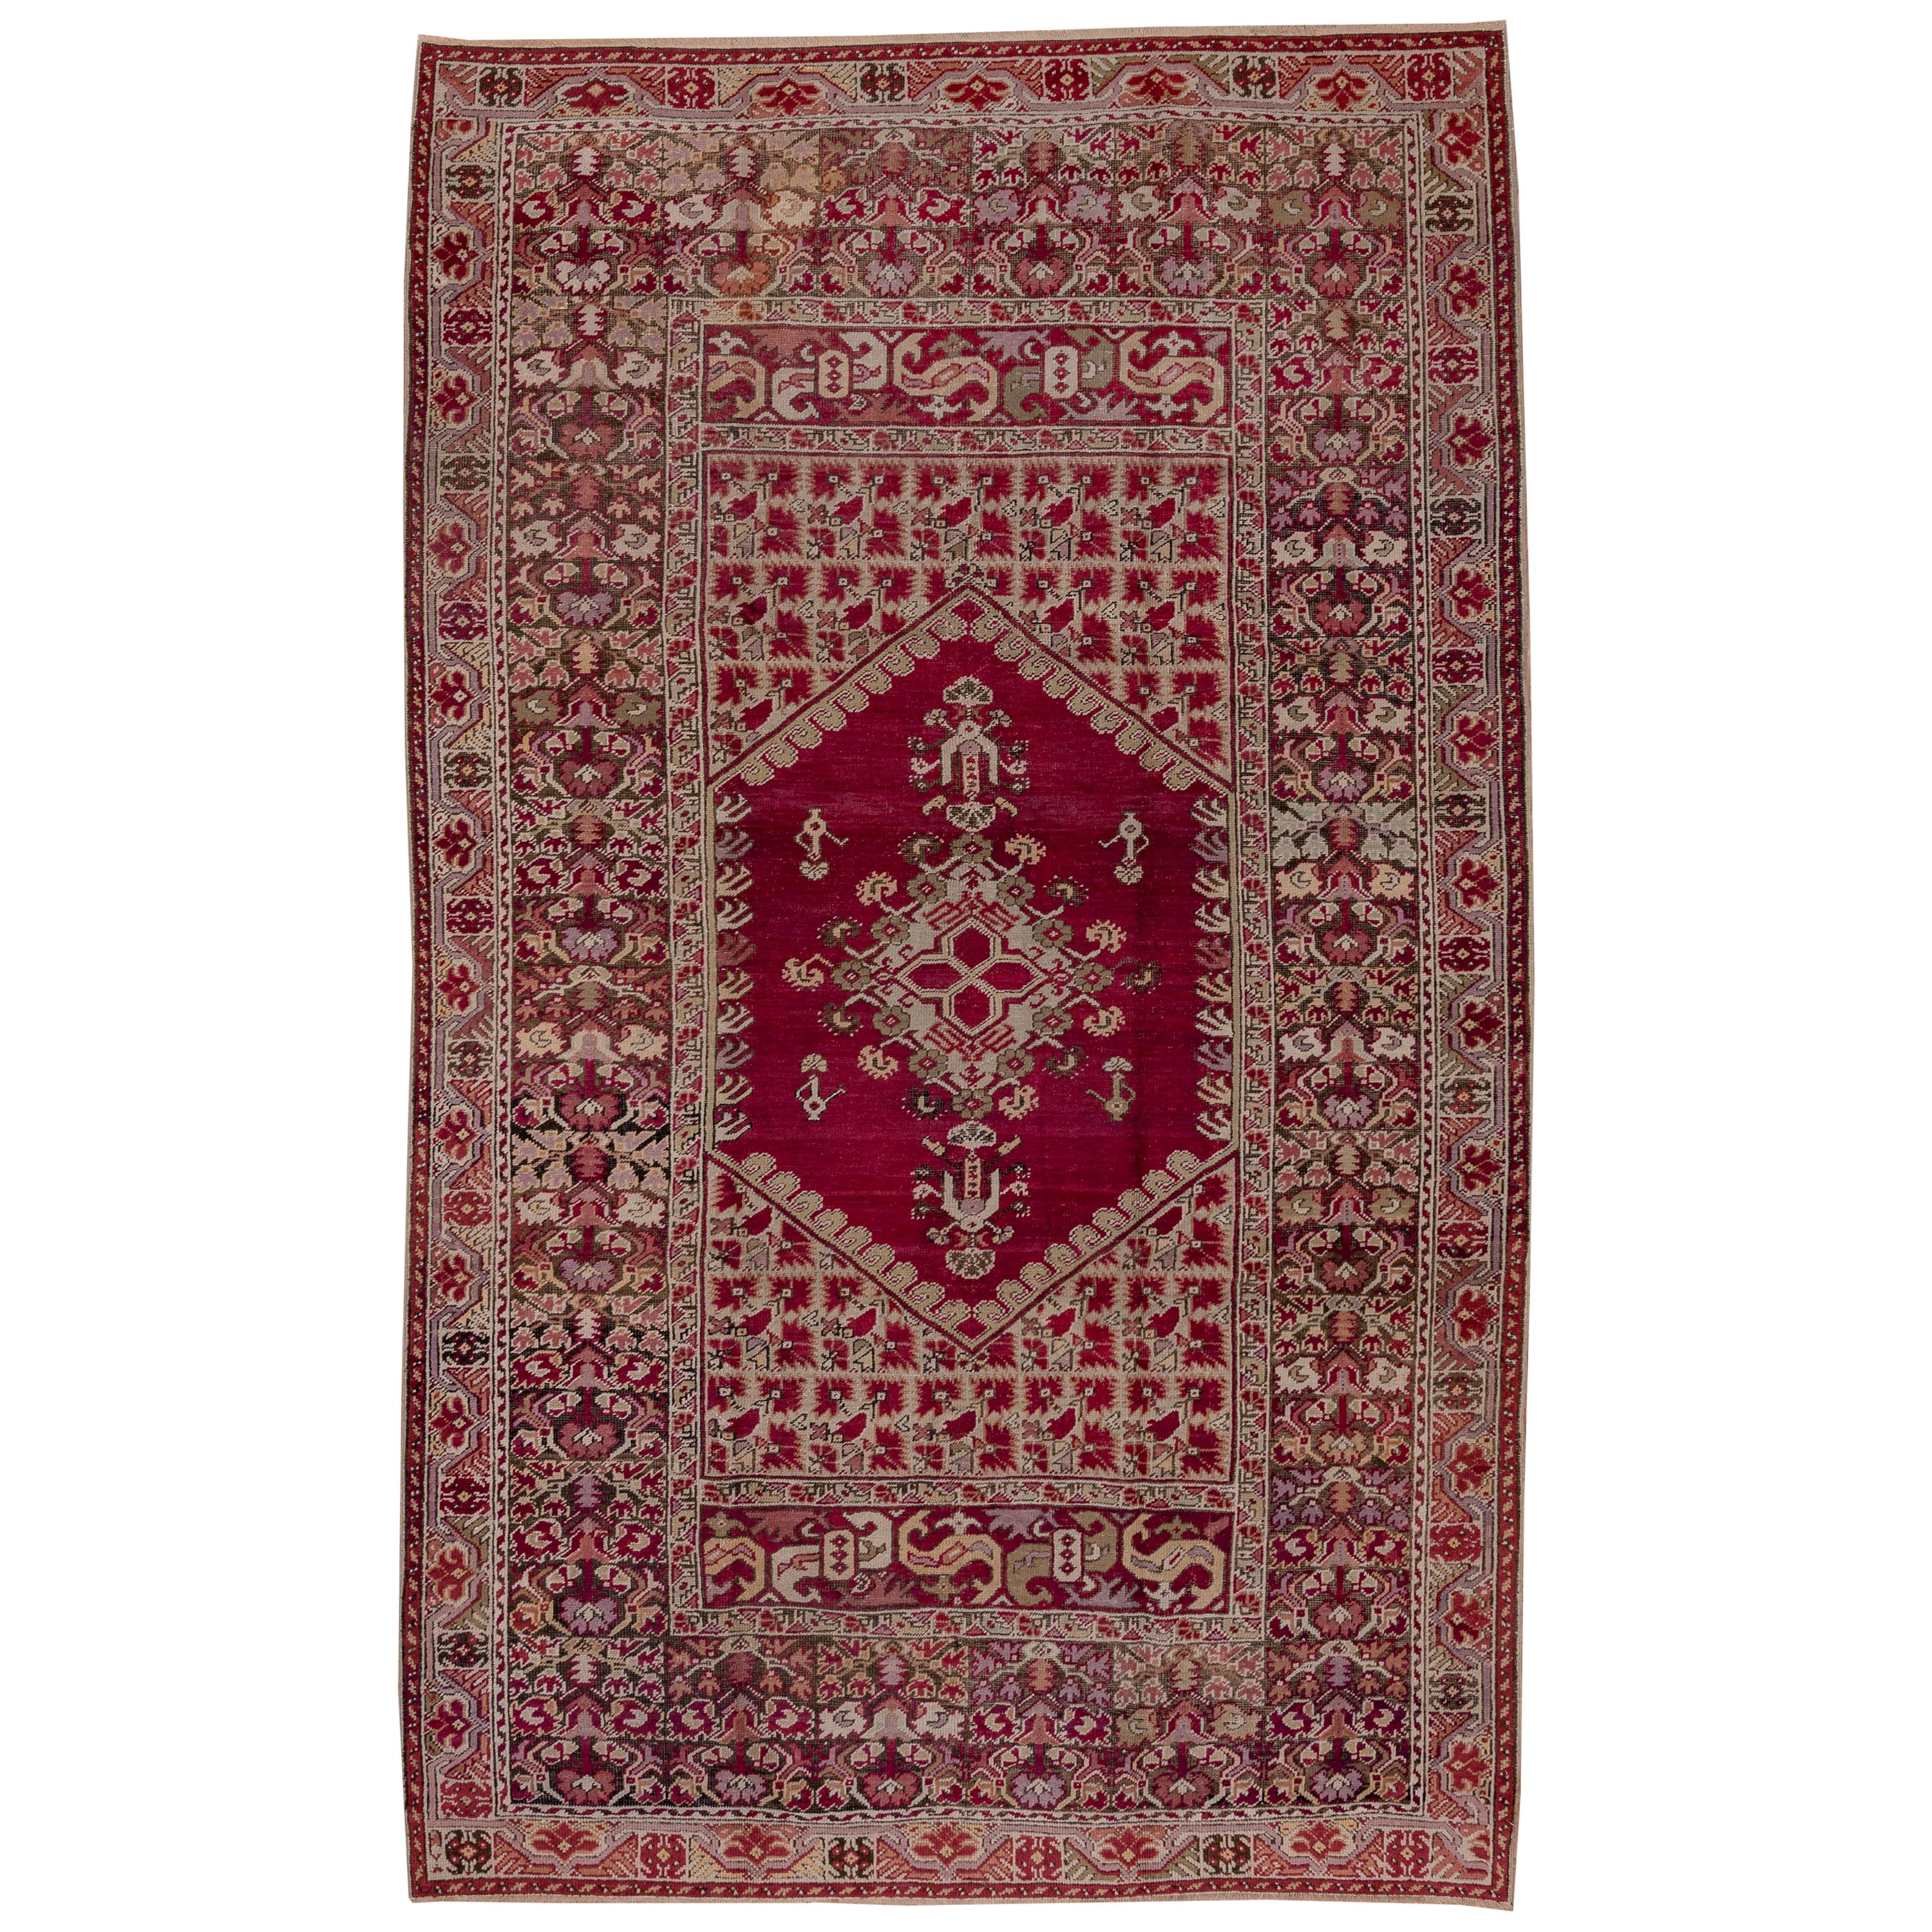 Finely Woven Antique Turkish Ghiordes Rug, Ruby Red Field, circa 1900s For Sale